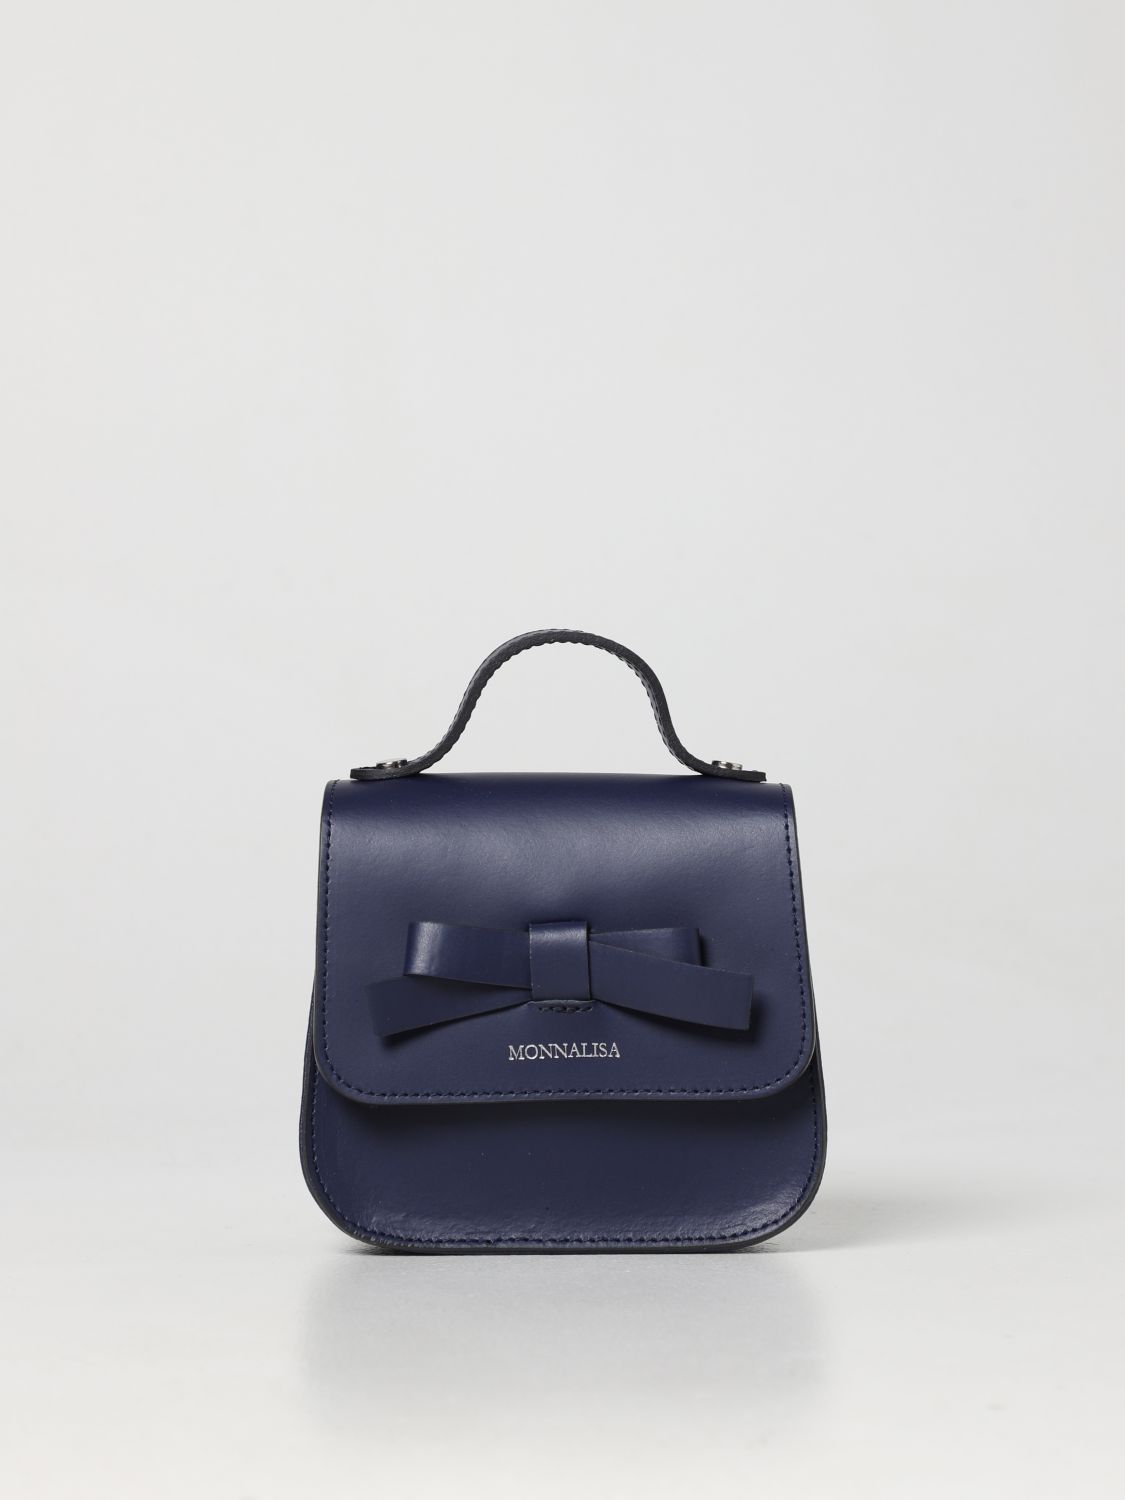 Monnalisa Bag In Laminated Leather In Navy